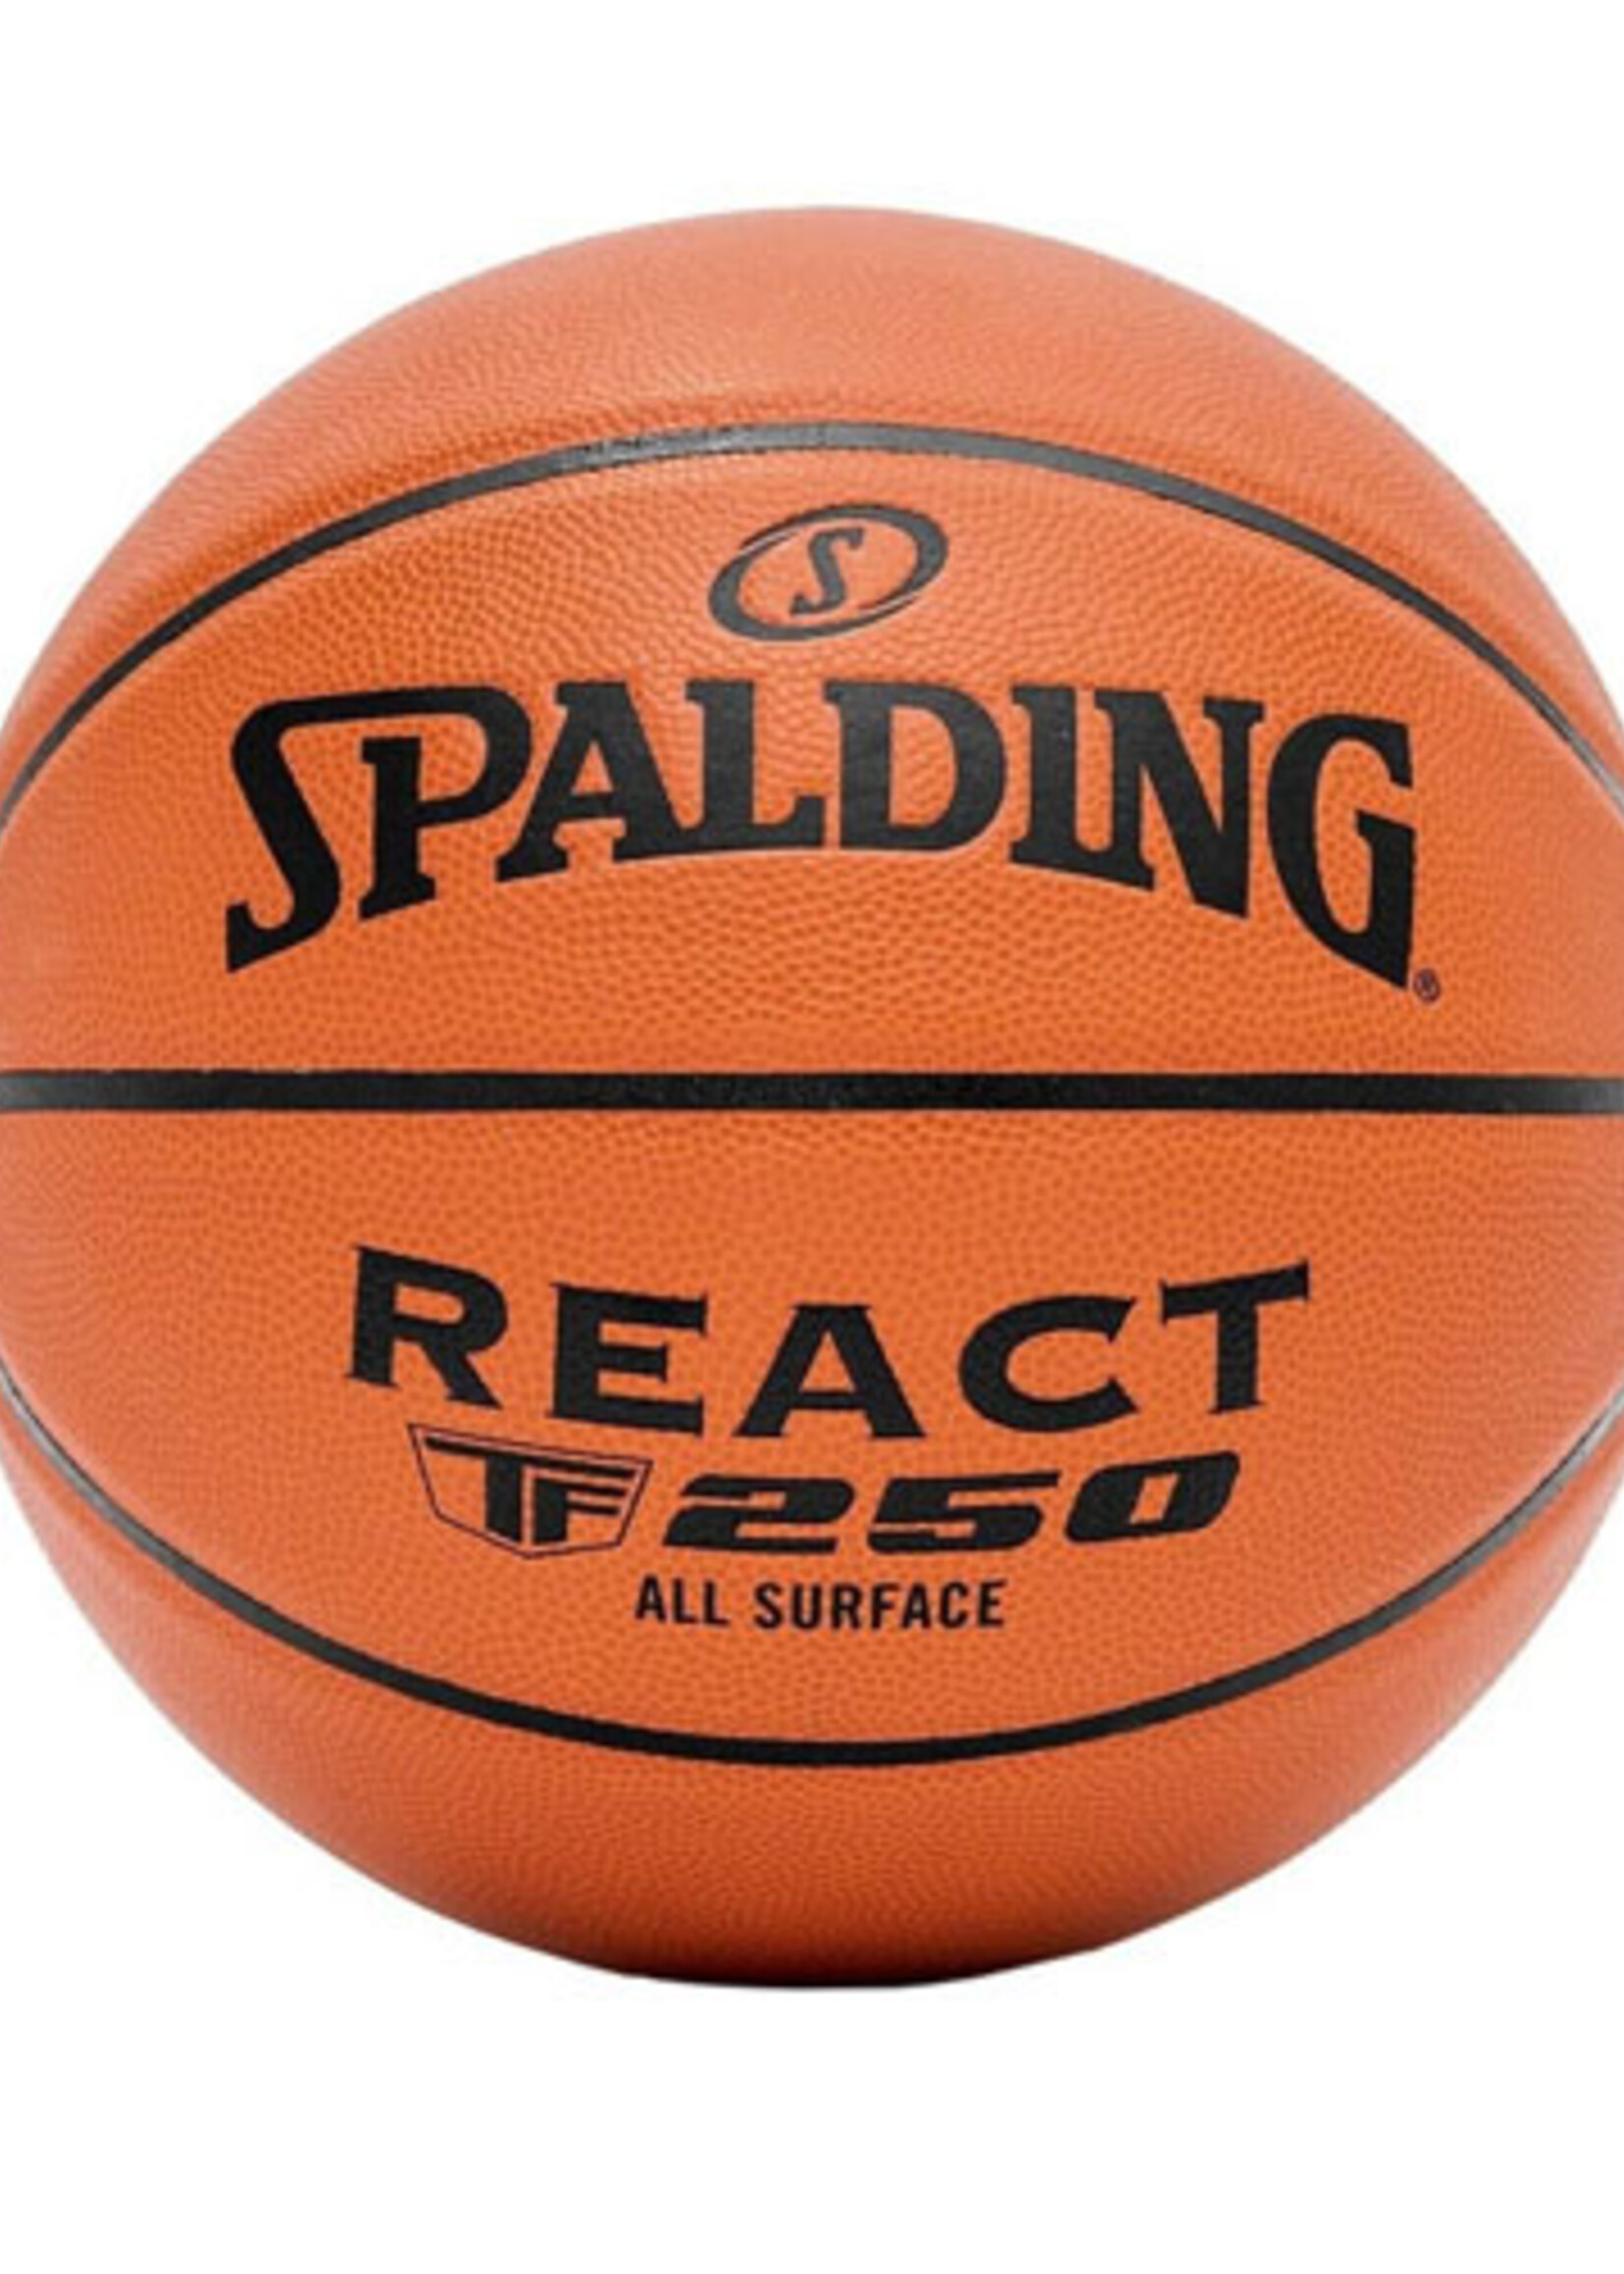 Spalding Spalding React TF-250 All Surface Indoor & Outdoor Basketbal